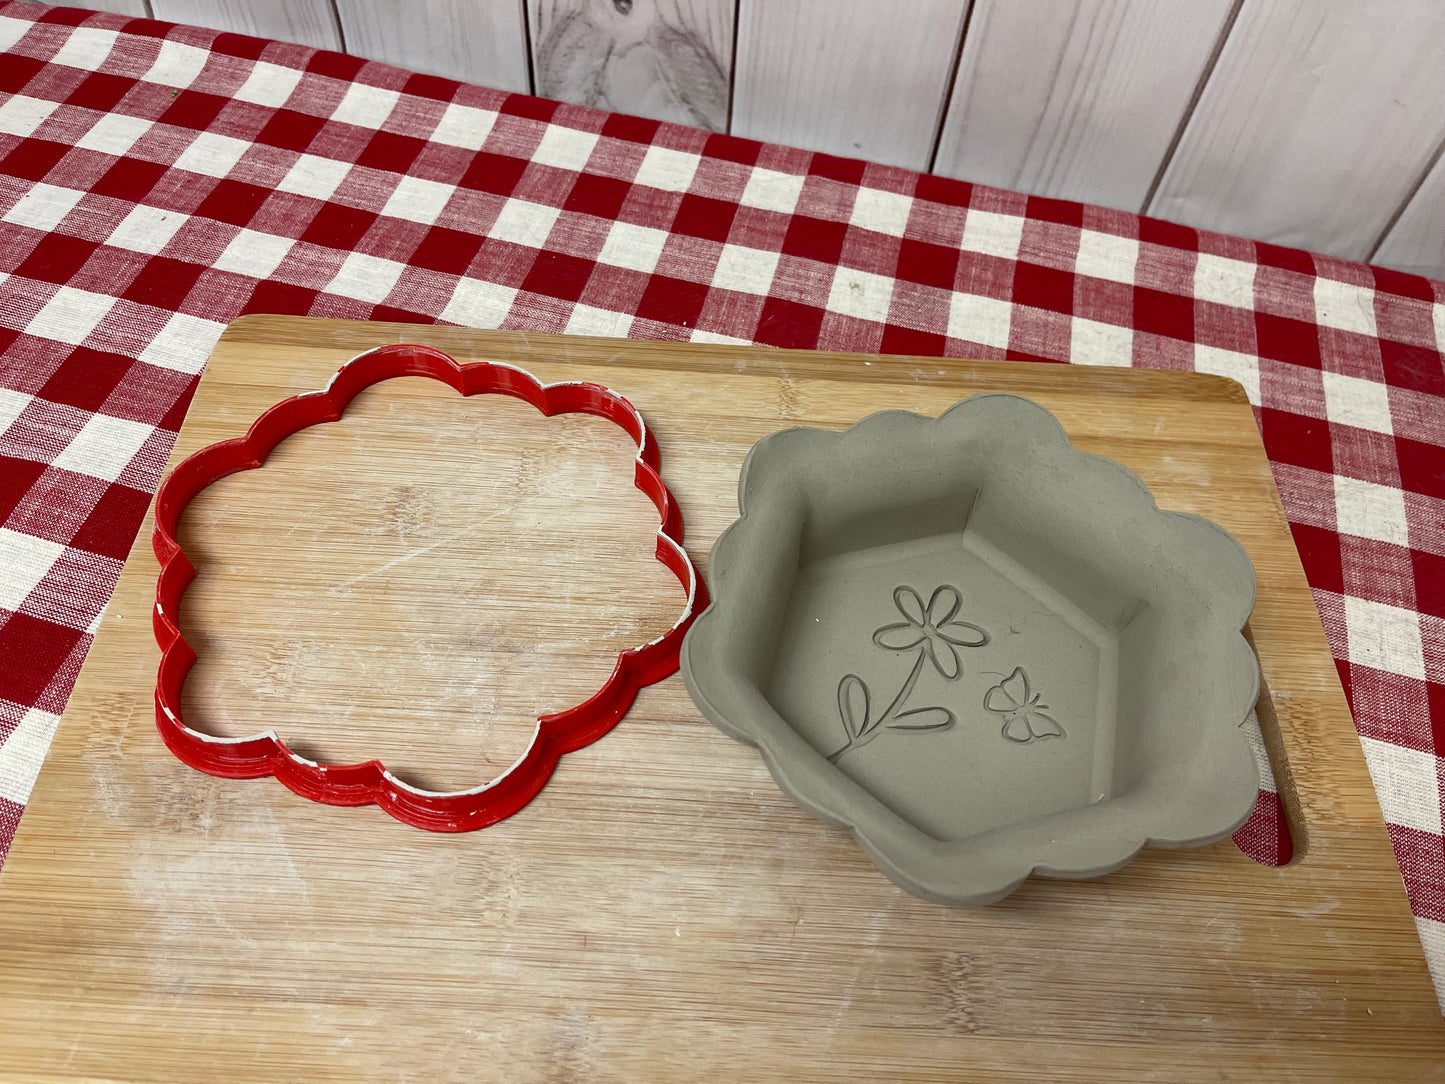 NEW Loose Scallop Edge, Clay Cutters for GR Pottery Forms "Wallies", set or individually